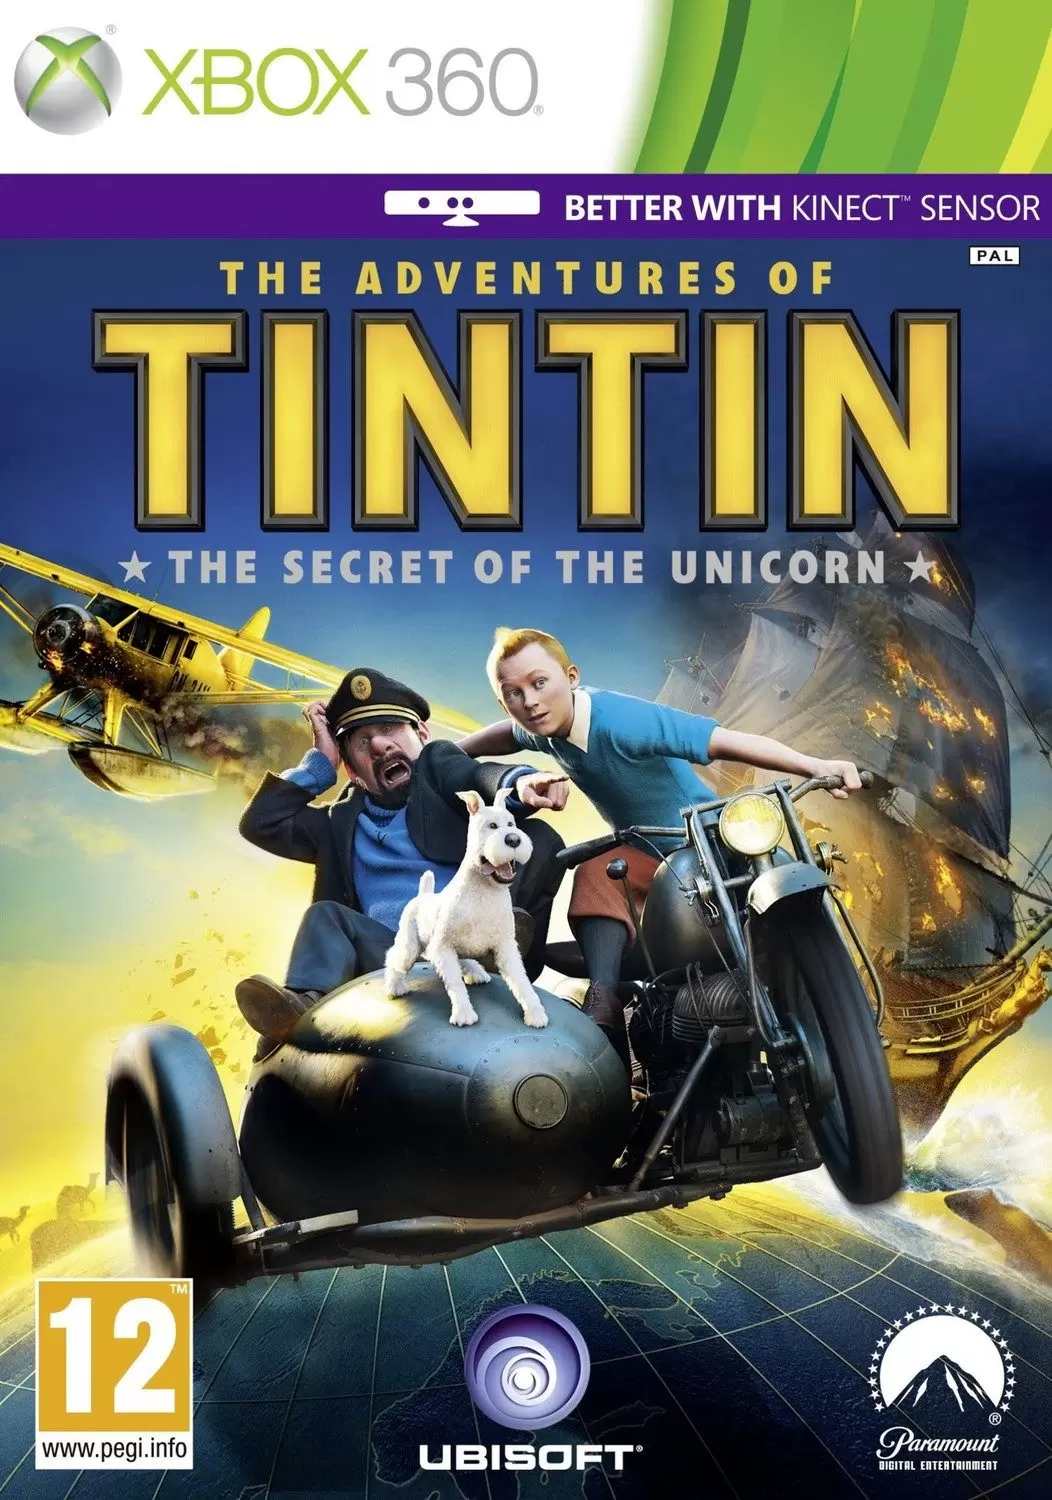 XBOX 360 Games - The Adventures of Tintin: The Game